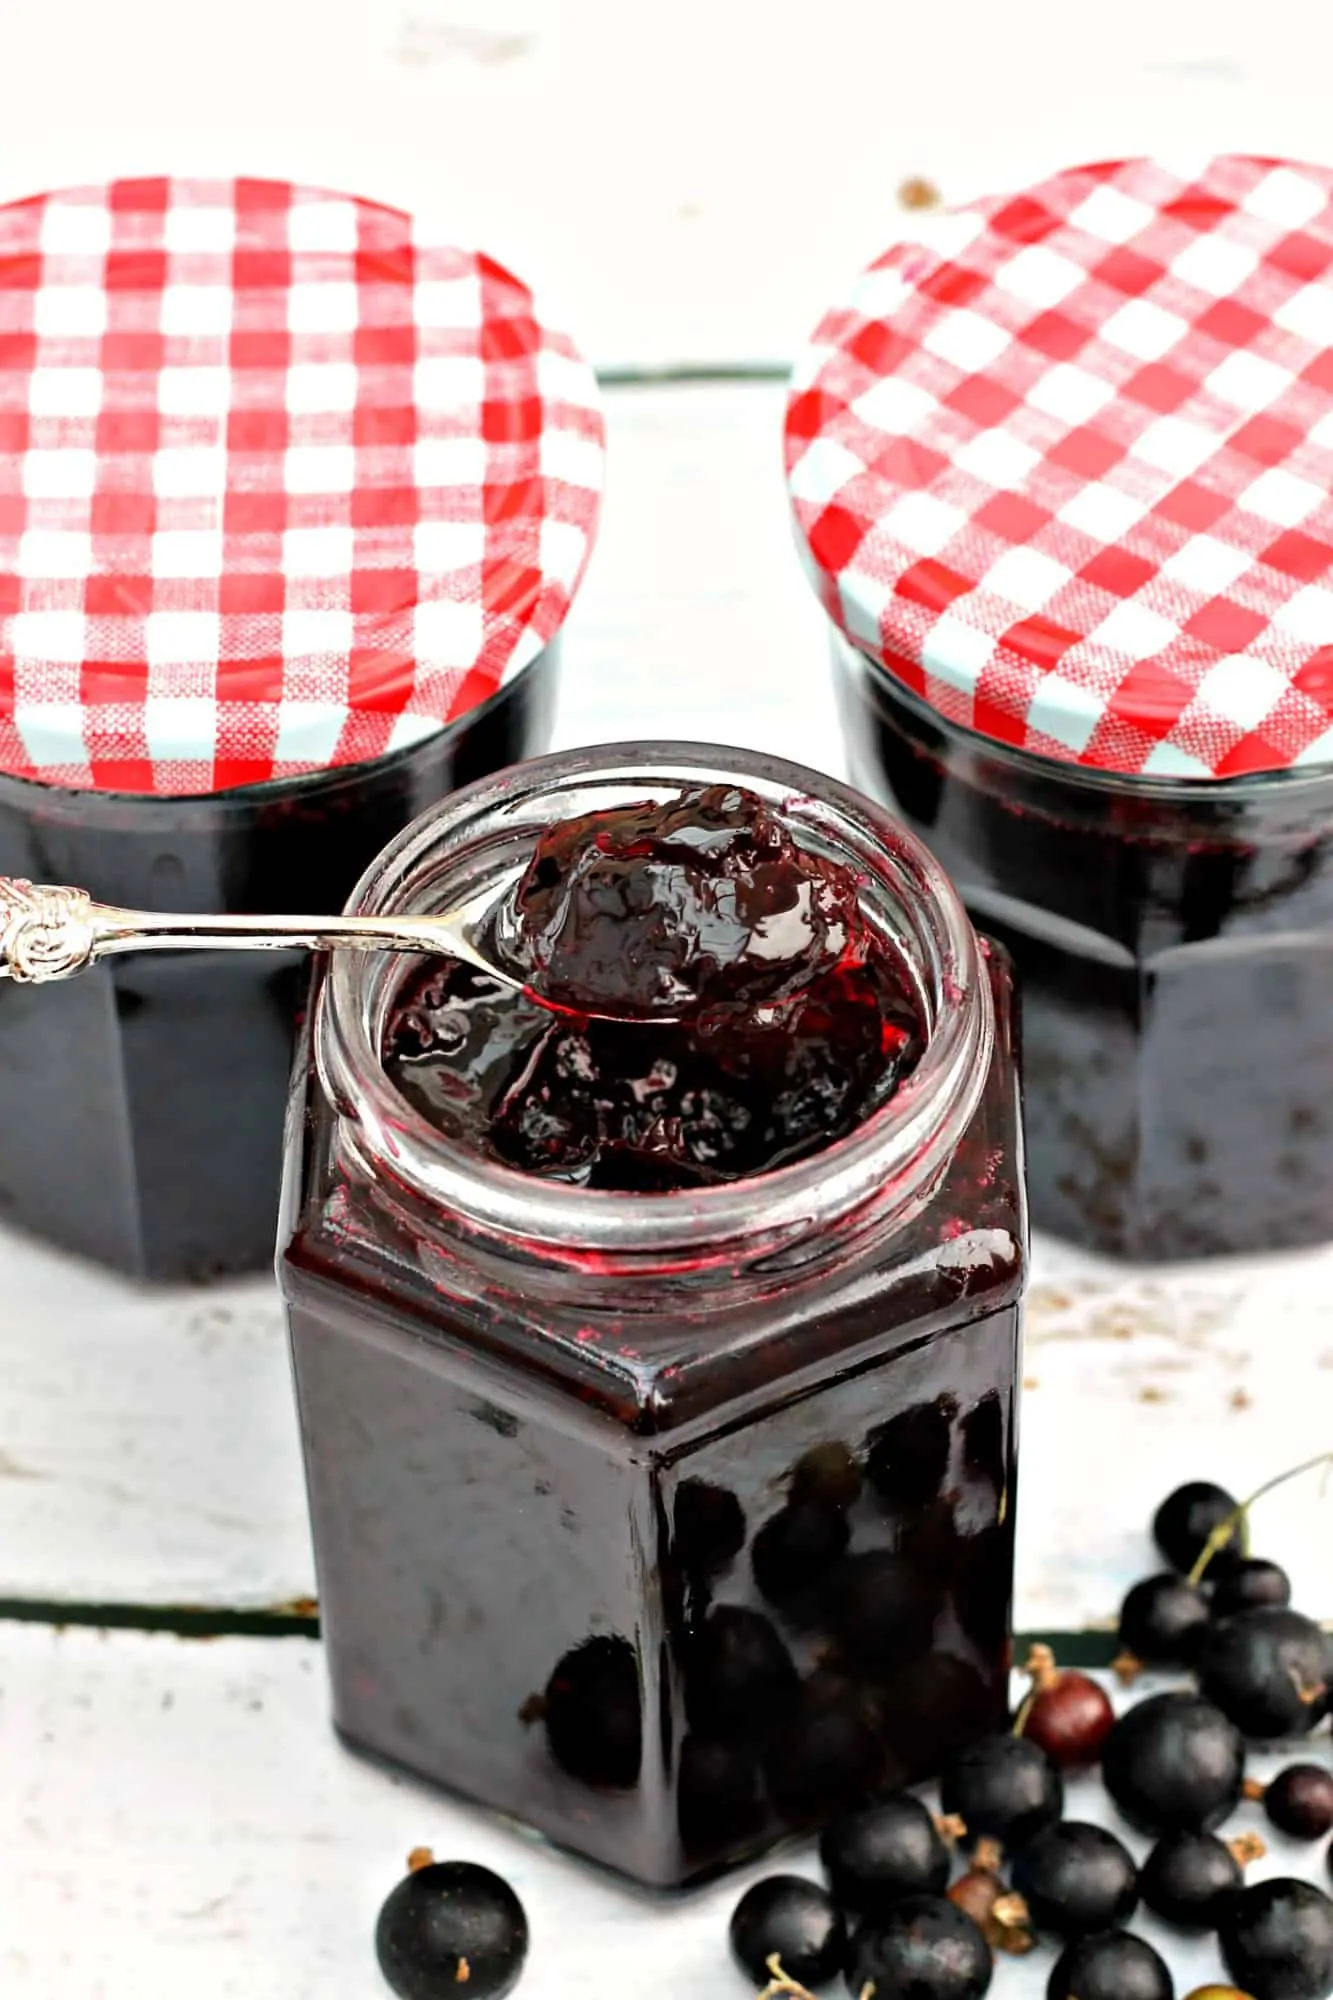 Jar of jam with a spoon of jam above, showing the perfect set.